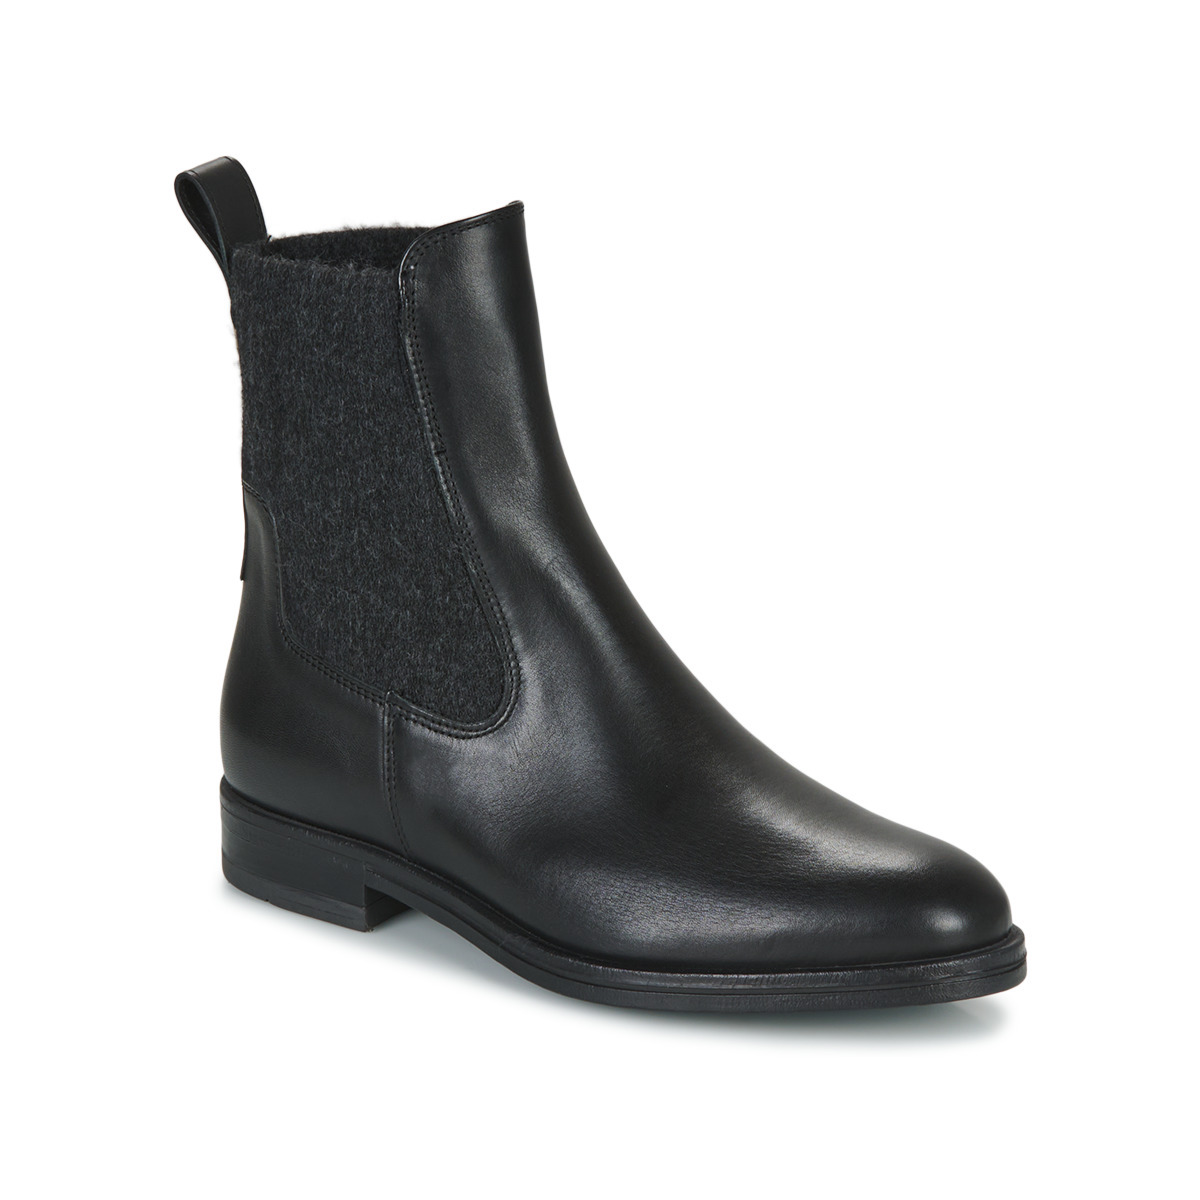 Jb Martin Woman Boots in Black by Spartoo GOOFASH